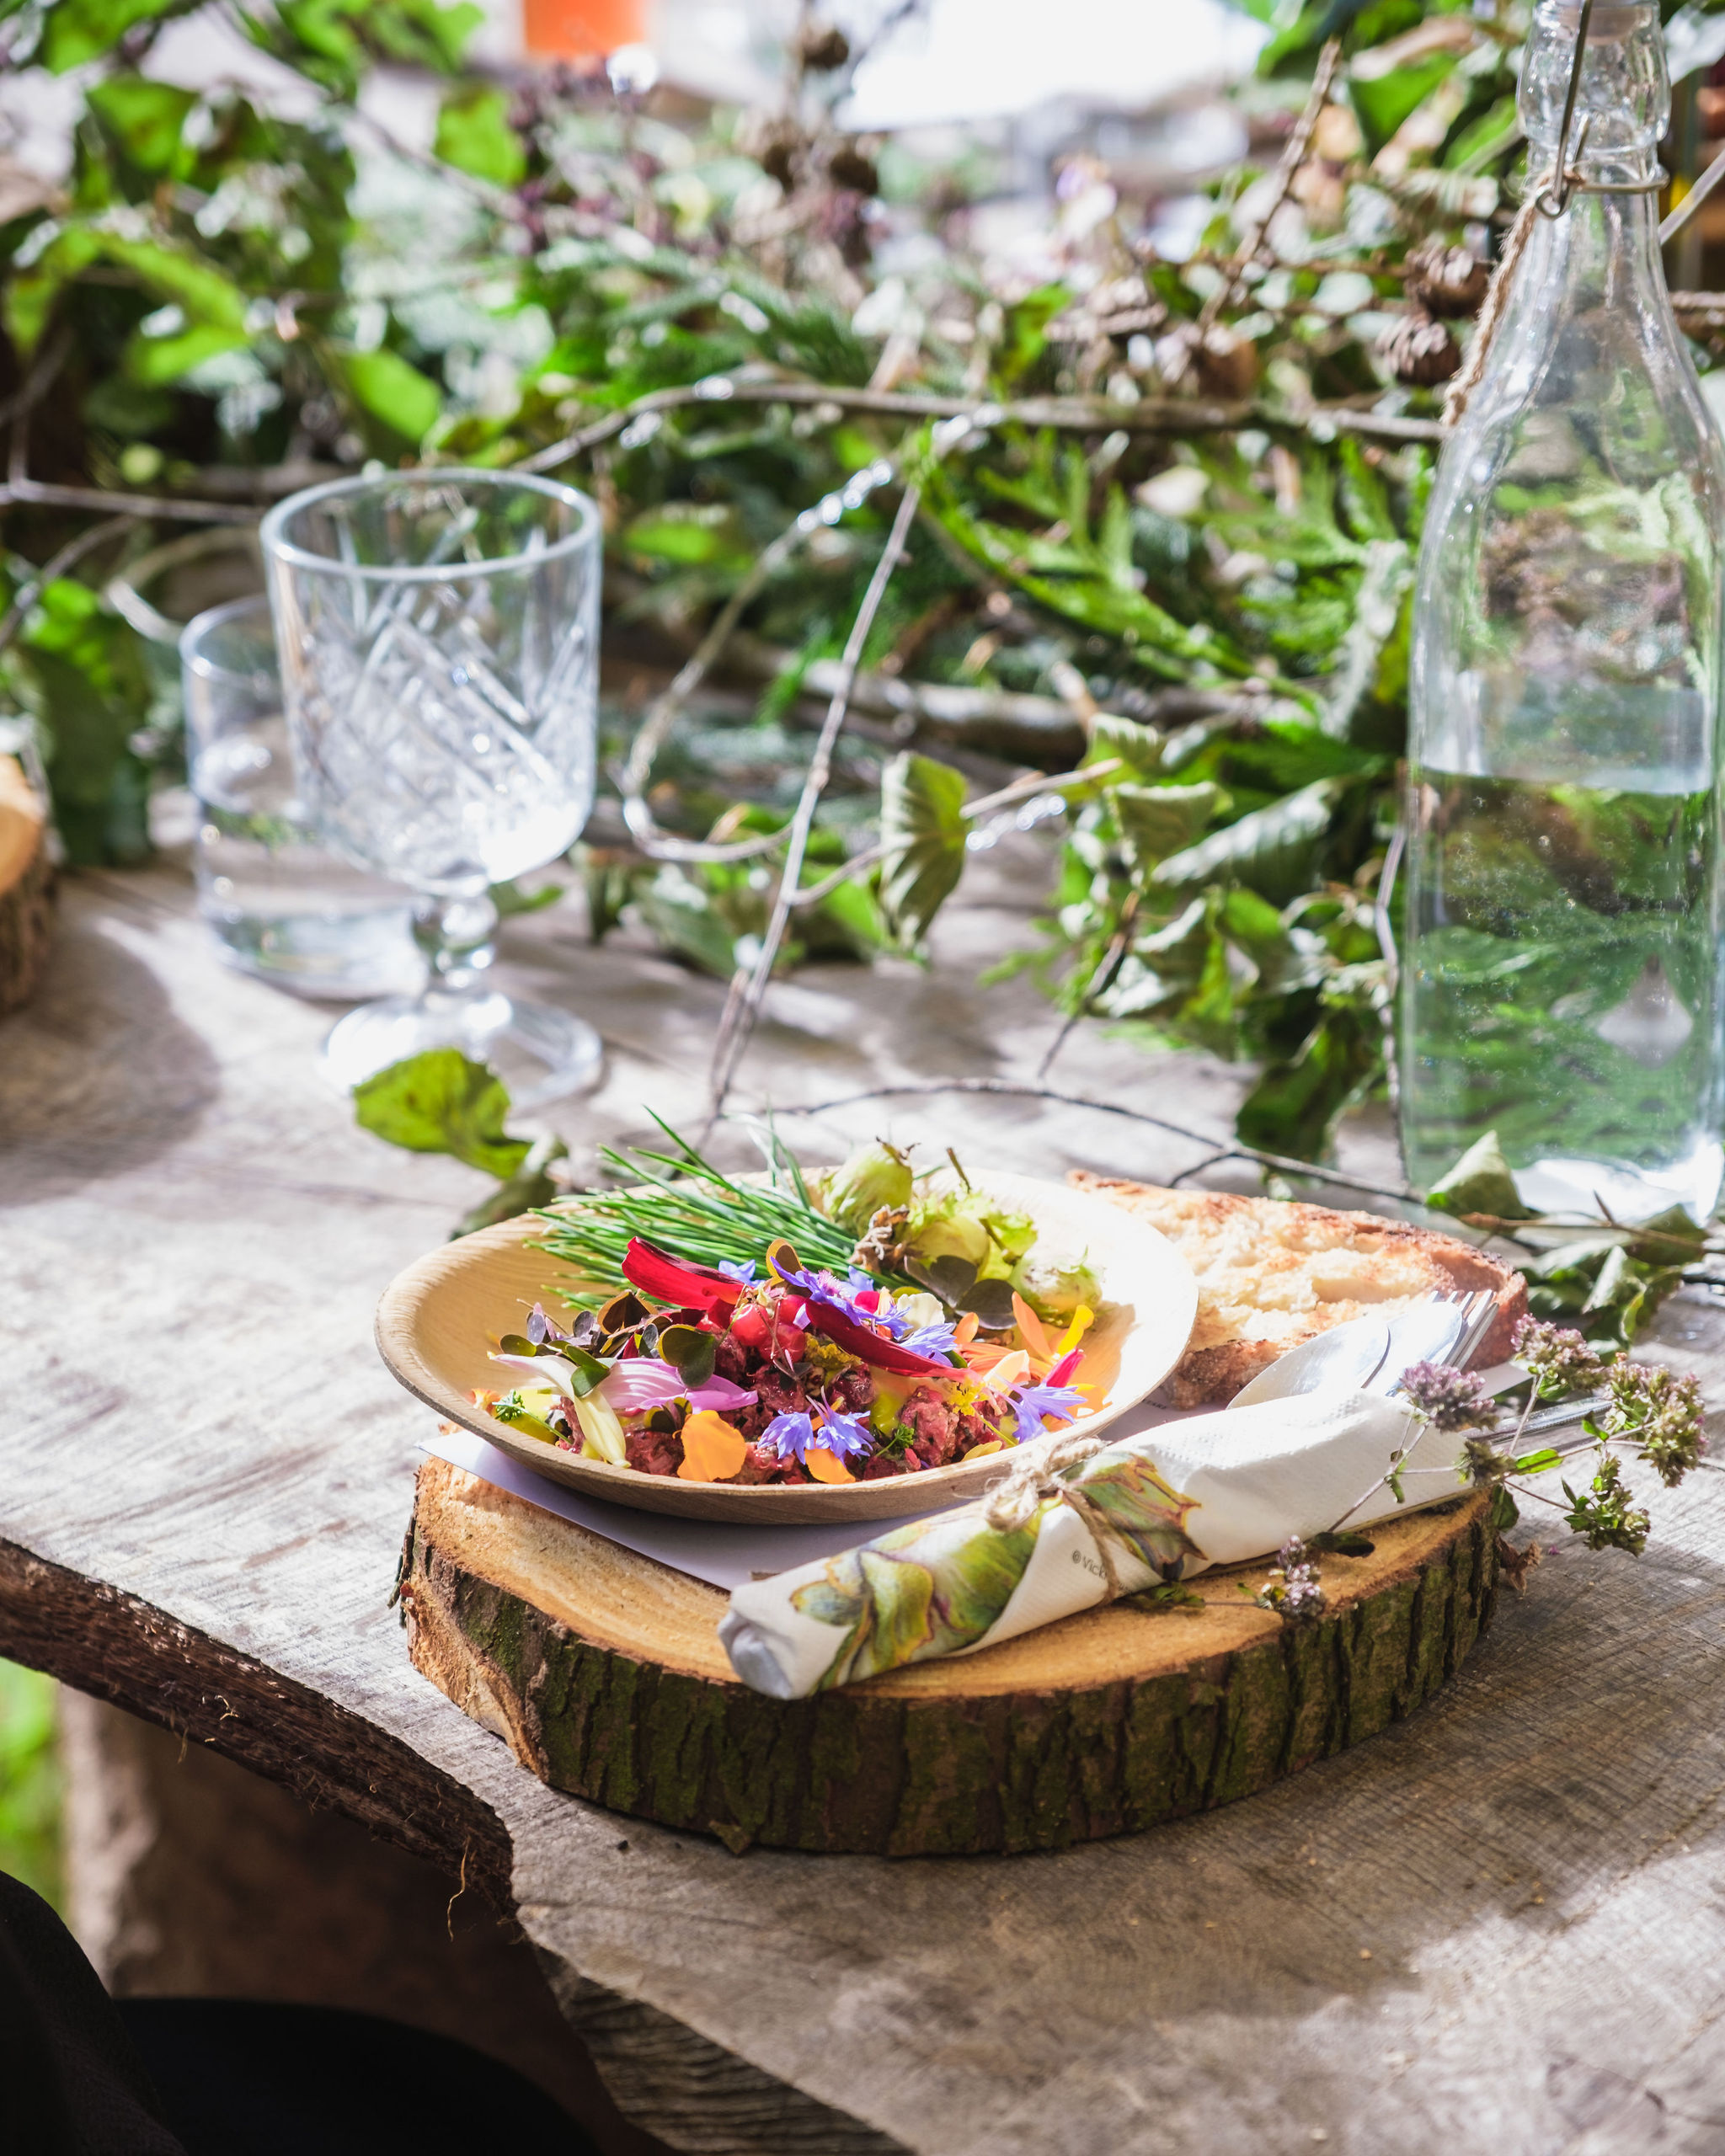 A plate filled with colorful vegetation gathered from Nomadic's woodland, served in the signature wood plate